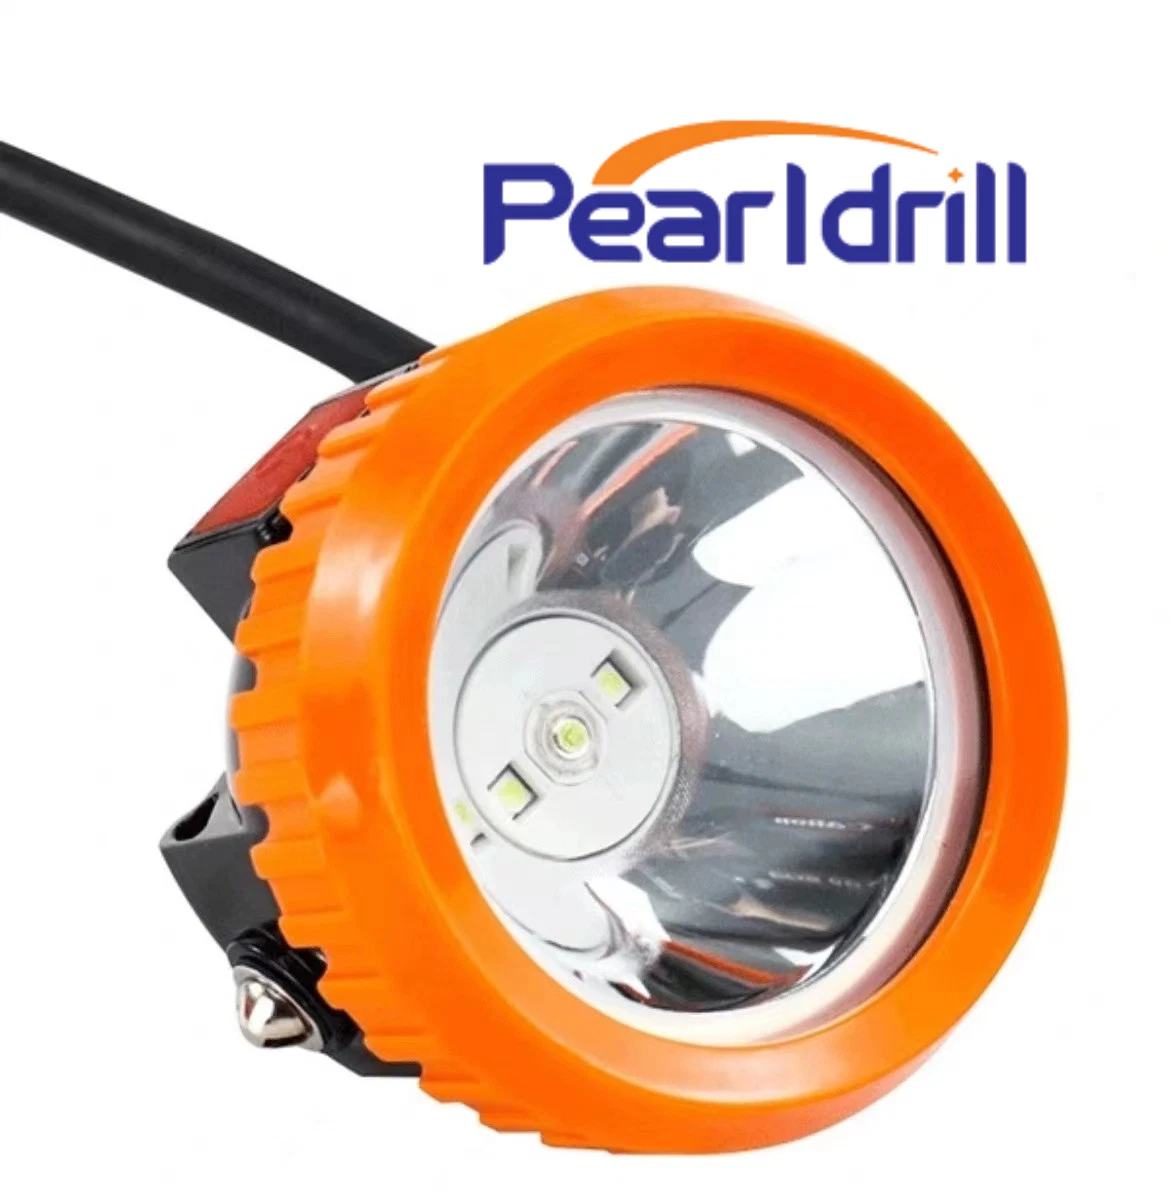 Pearldrill Mining Tool Explosion-Proof Lamp ABS Material LED Headlamp Kl4lm Kl5lm Kl6lm